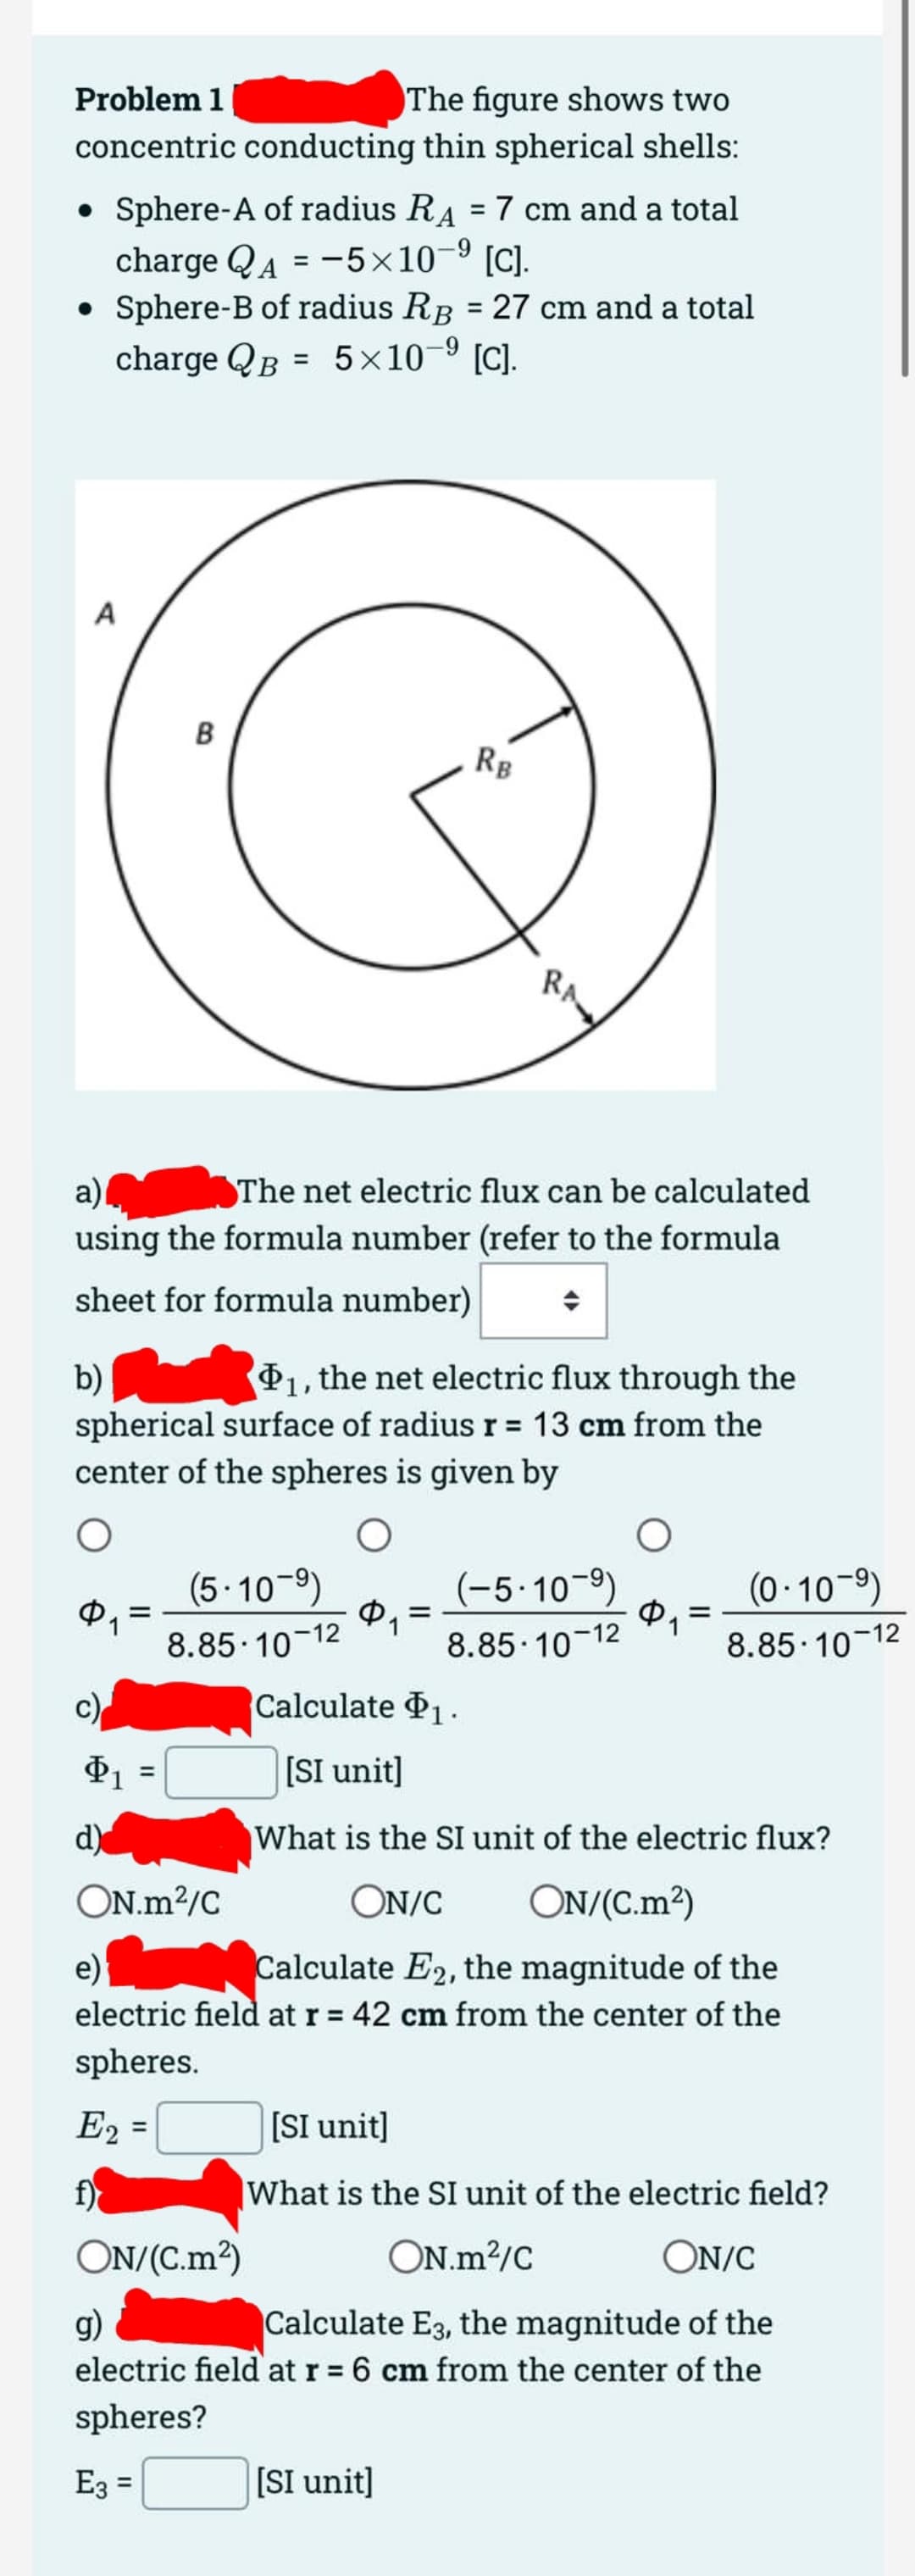 Problem 1
The figure shows two
concentric conducting thin spherical shells:
• Sphere-A of radius R = 7 cm and a total
charge QA = -5×10-⁹ [C].
Sphere-B of radius RB = 27 cm and a total
charge QB = 5×10-⁹ [C].
A
$1
a)
The net electric flux can be calculated
using the formula number (refer to the formula
sheet for formula number)
b)
₁, the net electric flux through the
spherical surface of radius r = 13 cm from the
center of the spheres is given by
O
c)
$1
d)
=
B
=
E2
f)
(5.10-⁹)
8.85-10-12
ON.m²/C
=
$1
Calculate $₁.
[SI unit]
What is the SI unit of the electric flux?
ON/C
ON/(C.m²)
e)
Calculate E2, the magnitude of the
electric field at r = 42 cm from the center of the
spheres.
RB
ON/(C.m²)
RA
=
[SI unit]
(-5-10-⁹)
8.85-10-12
O
Φ
[SI unit]
What is the SI unit of the electric field?
ON.m²/C
ON/C
g)
Calculate E3, the magnitude of the
electric field at r = 6 cm from the center of the
spheres?
E3 =
=
(0-10-⁹)
8.85-10-12